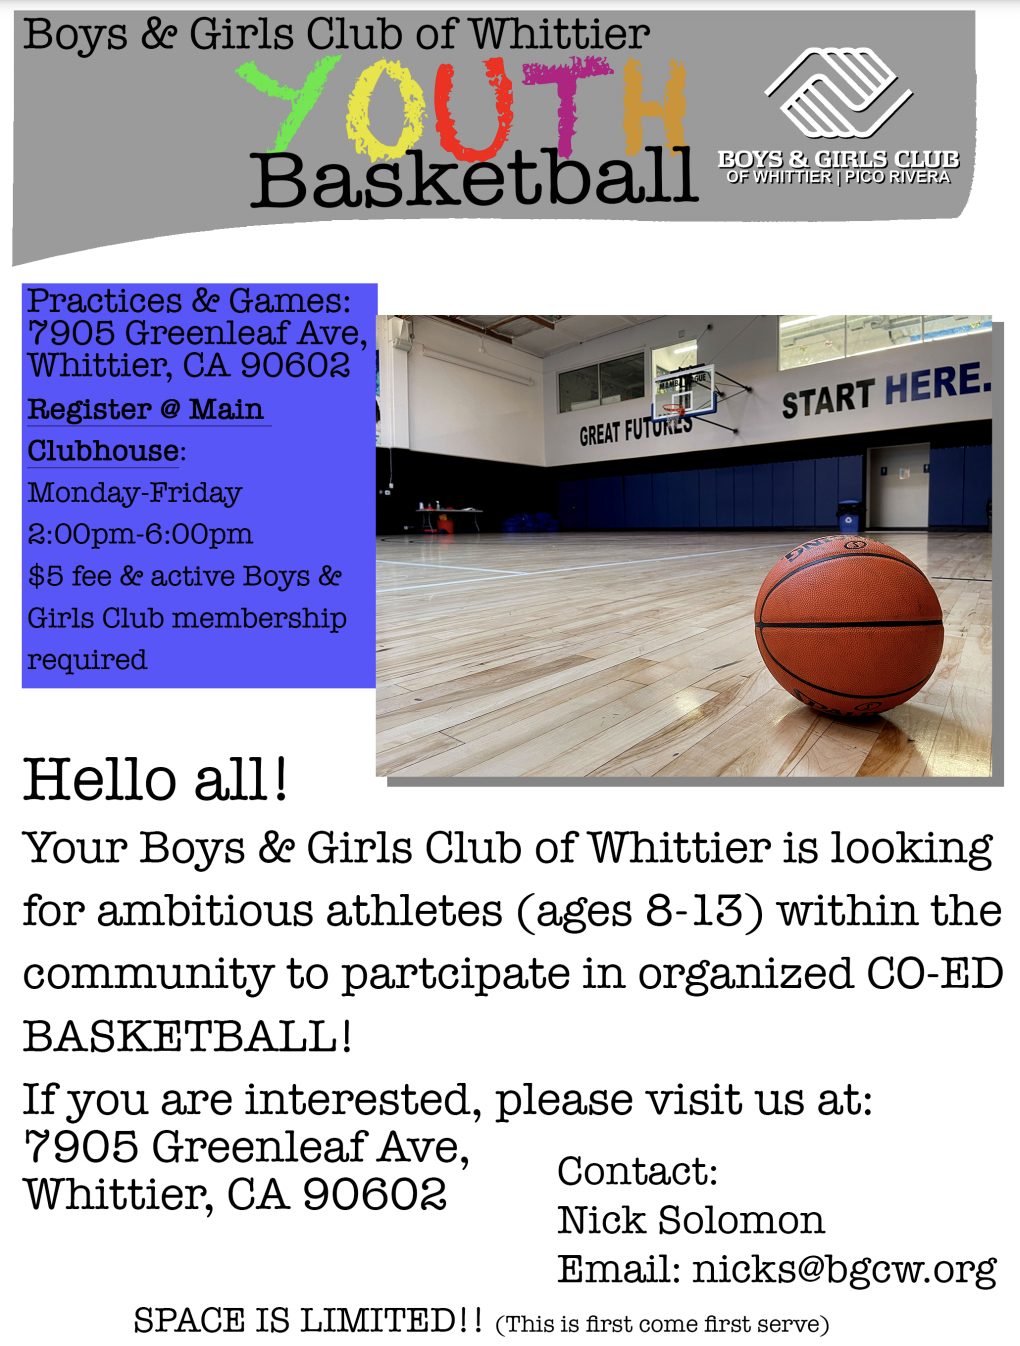 Girls and Boys of Whittier Basketball Flyer